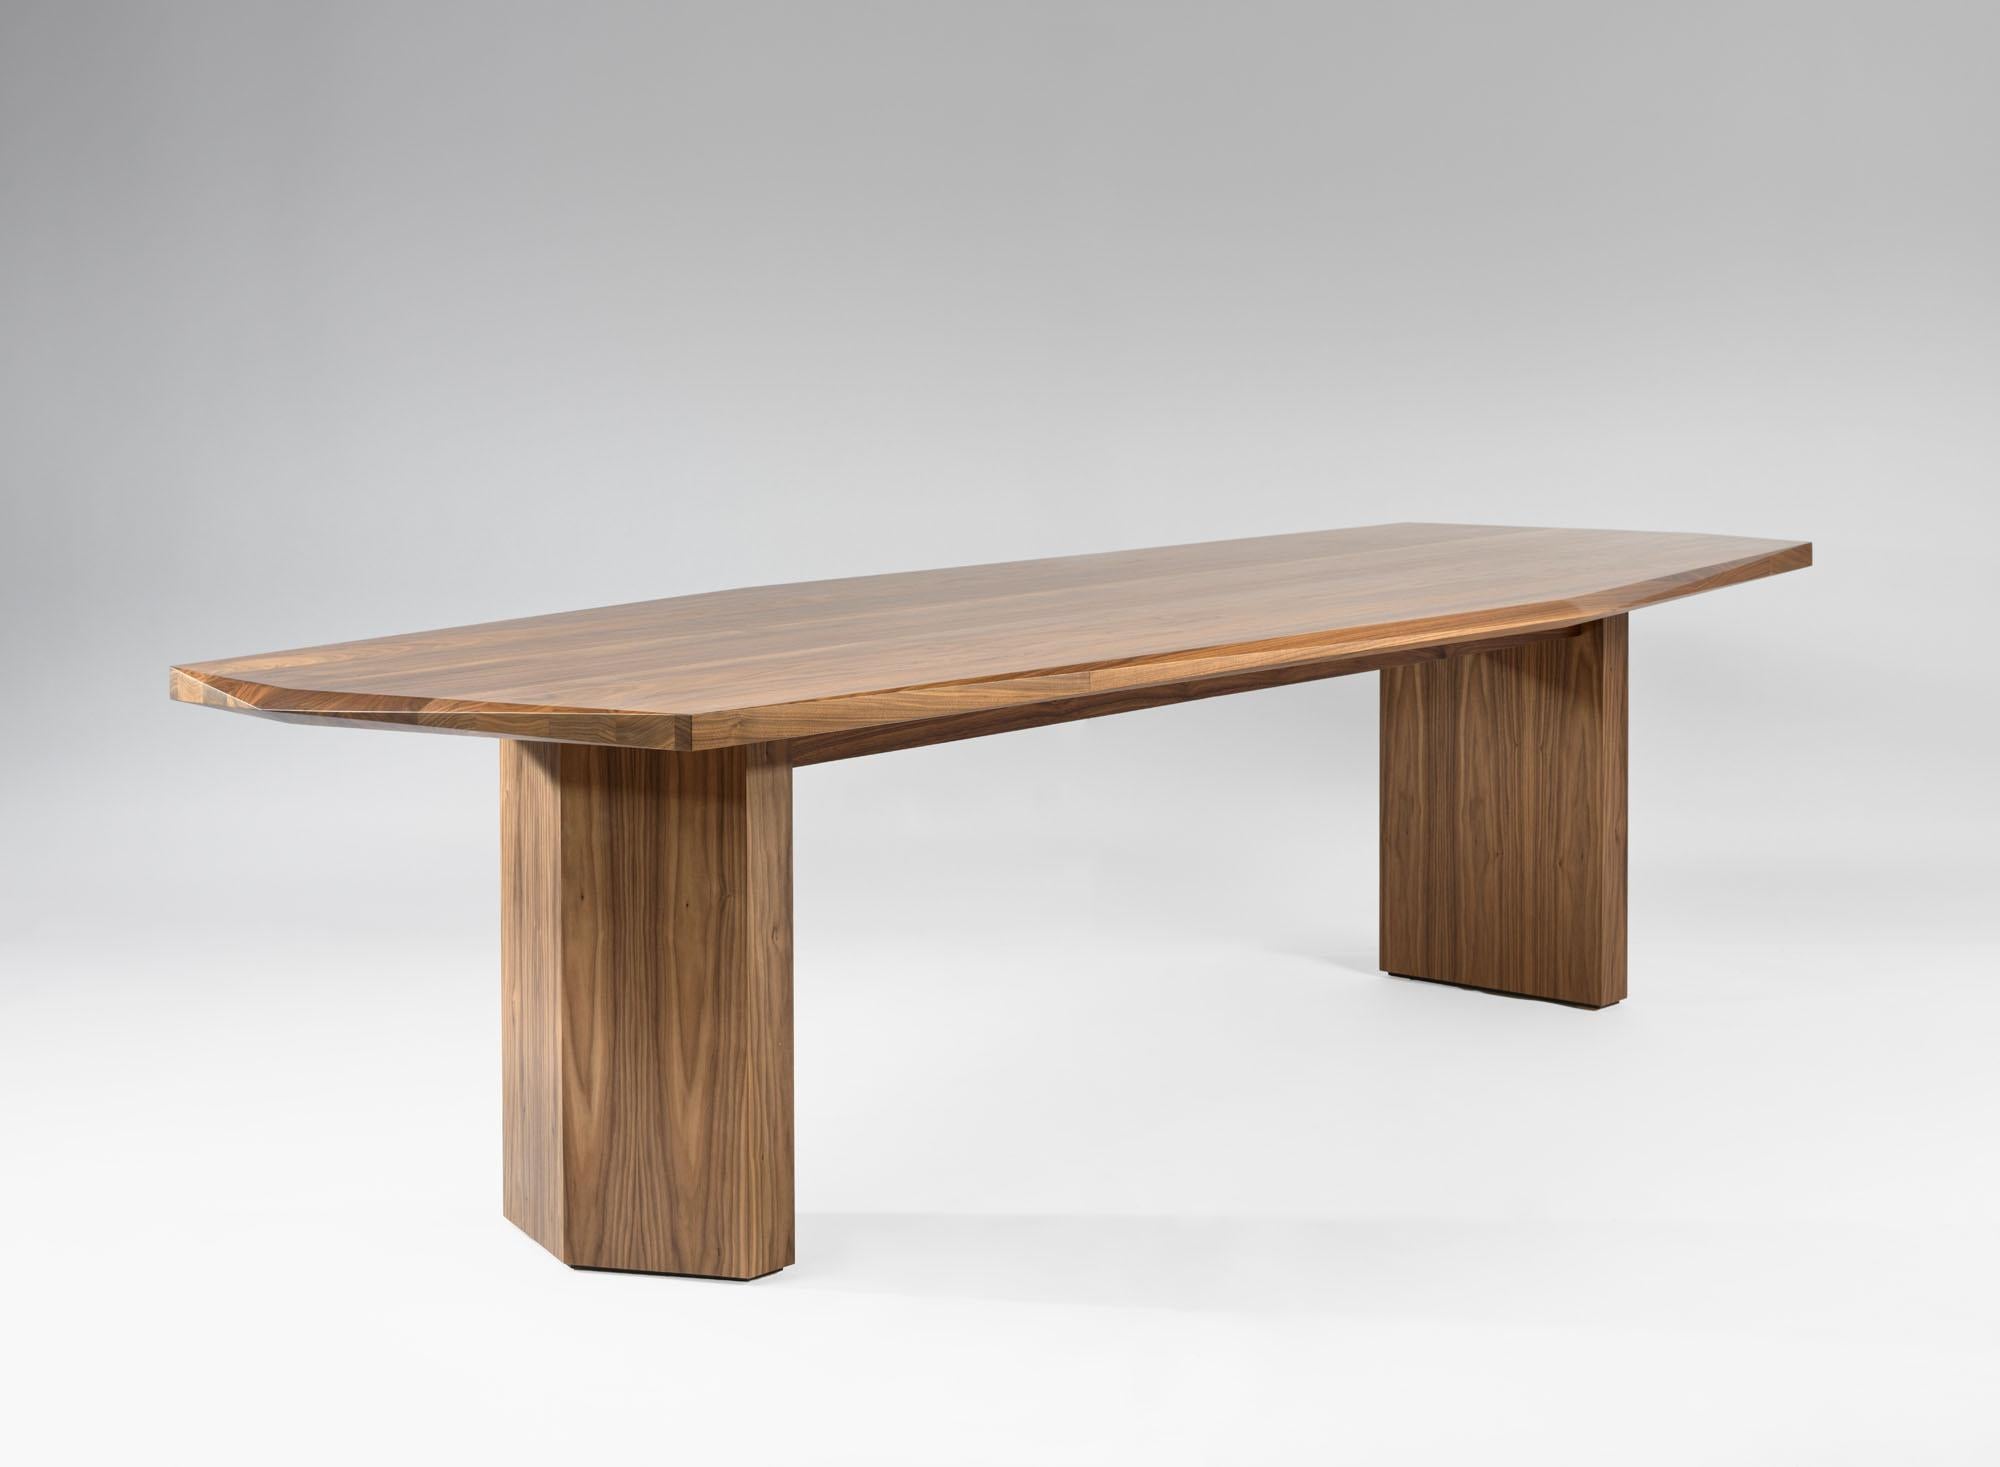 Hera table 300 by Tim Vranken
Materials: American walnut
Dimensions: L 300 x W 111 x H 75 cm

Also available in other types of wood. 

Hera, an interplay of lines and shapes, without the slightest frills. 

Tim Vranken is a Belgian furniture